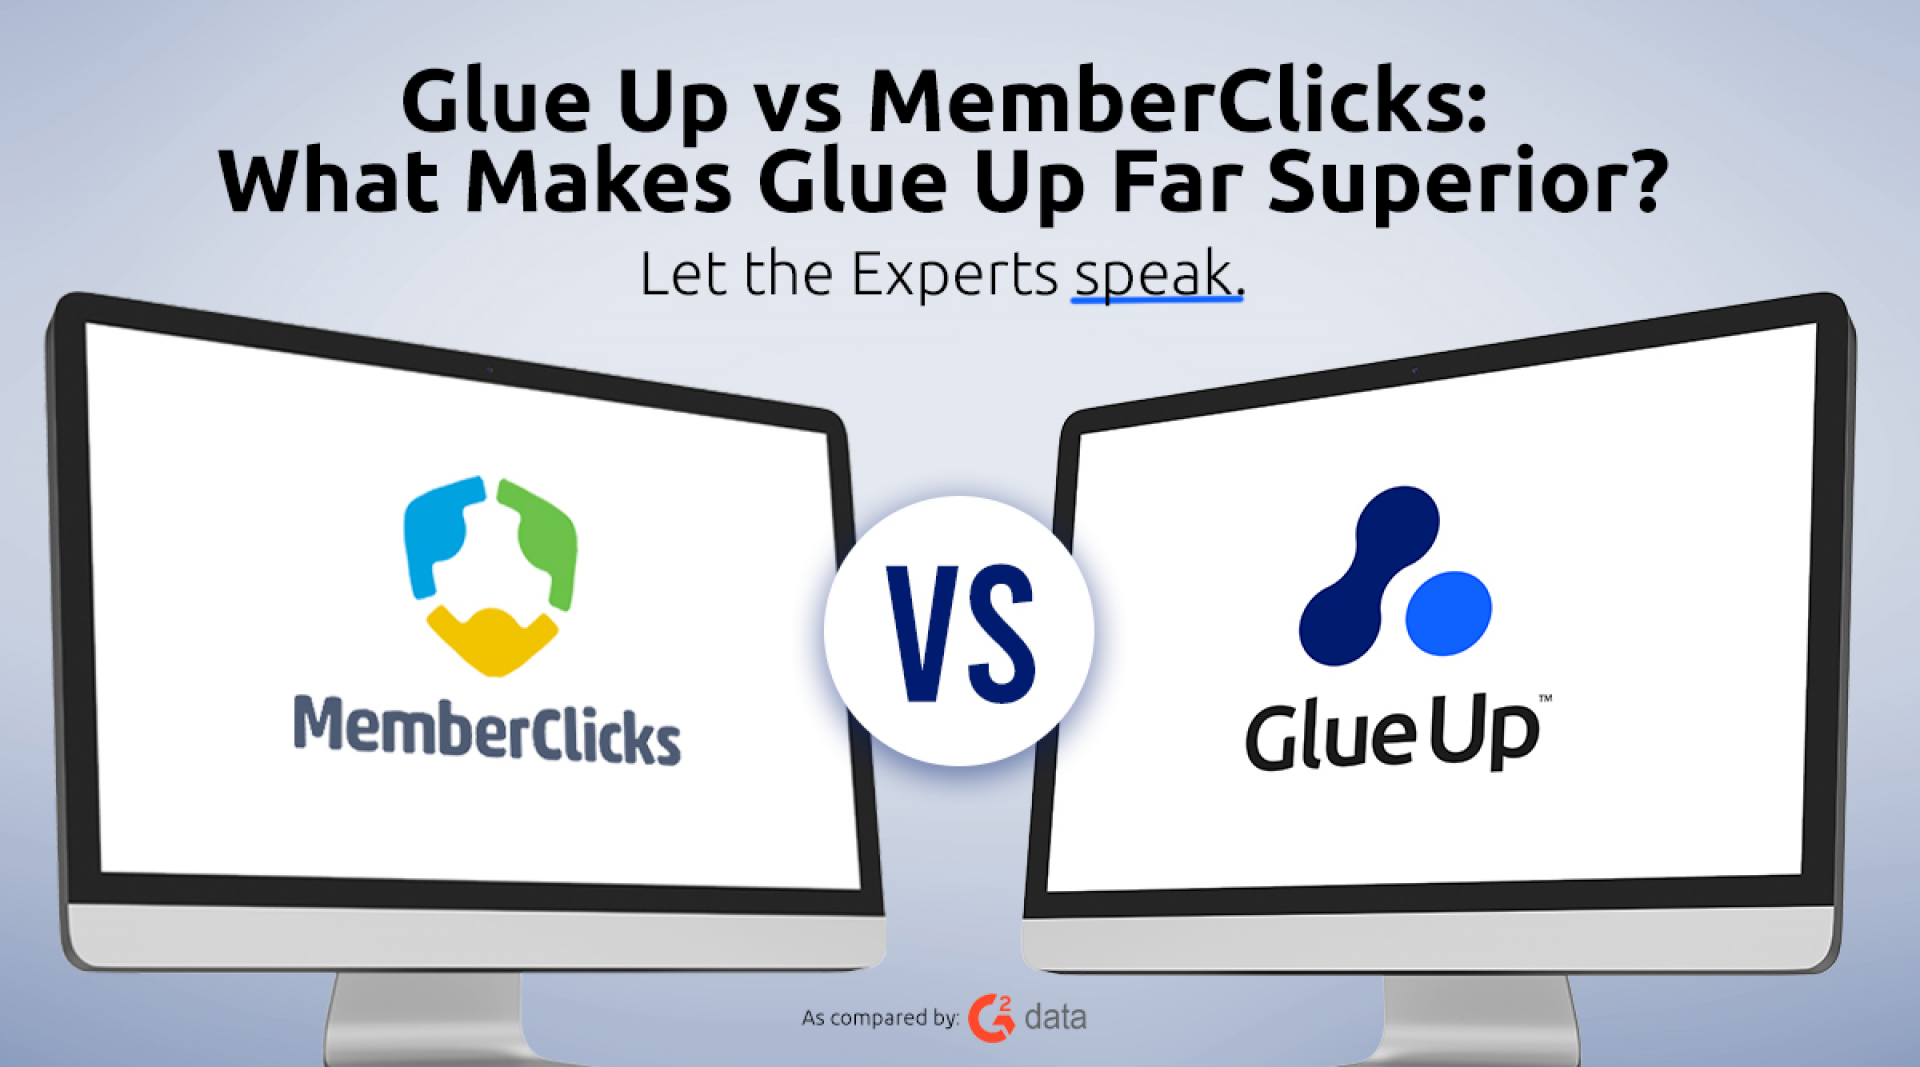 Glue Up vs MemberClicks: Why Is Glue Up Better?